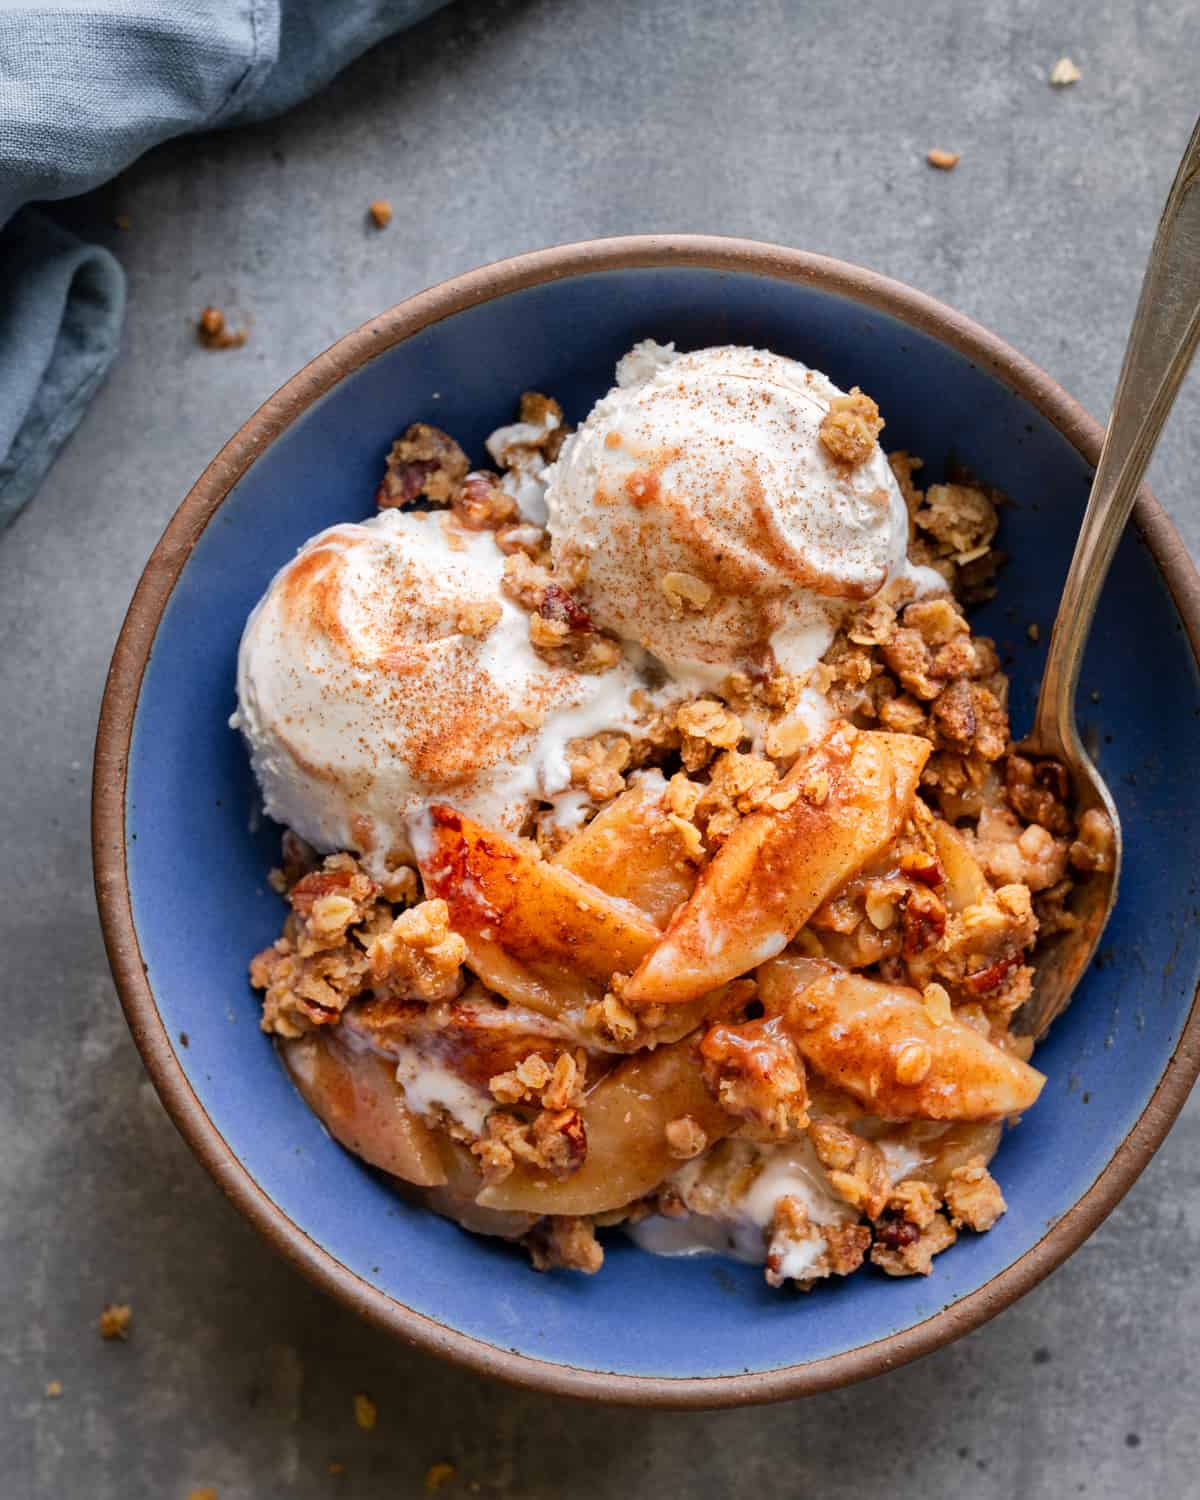 Apple crisp with vegan ice cream with a spoon in a blue bowl on a table.